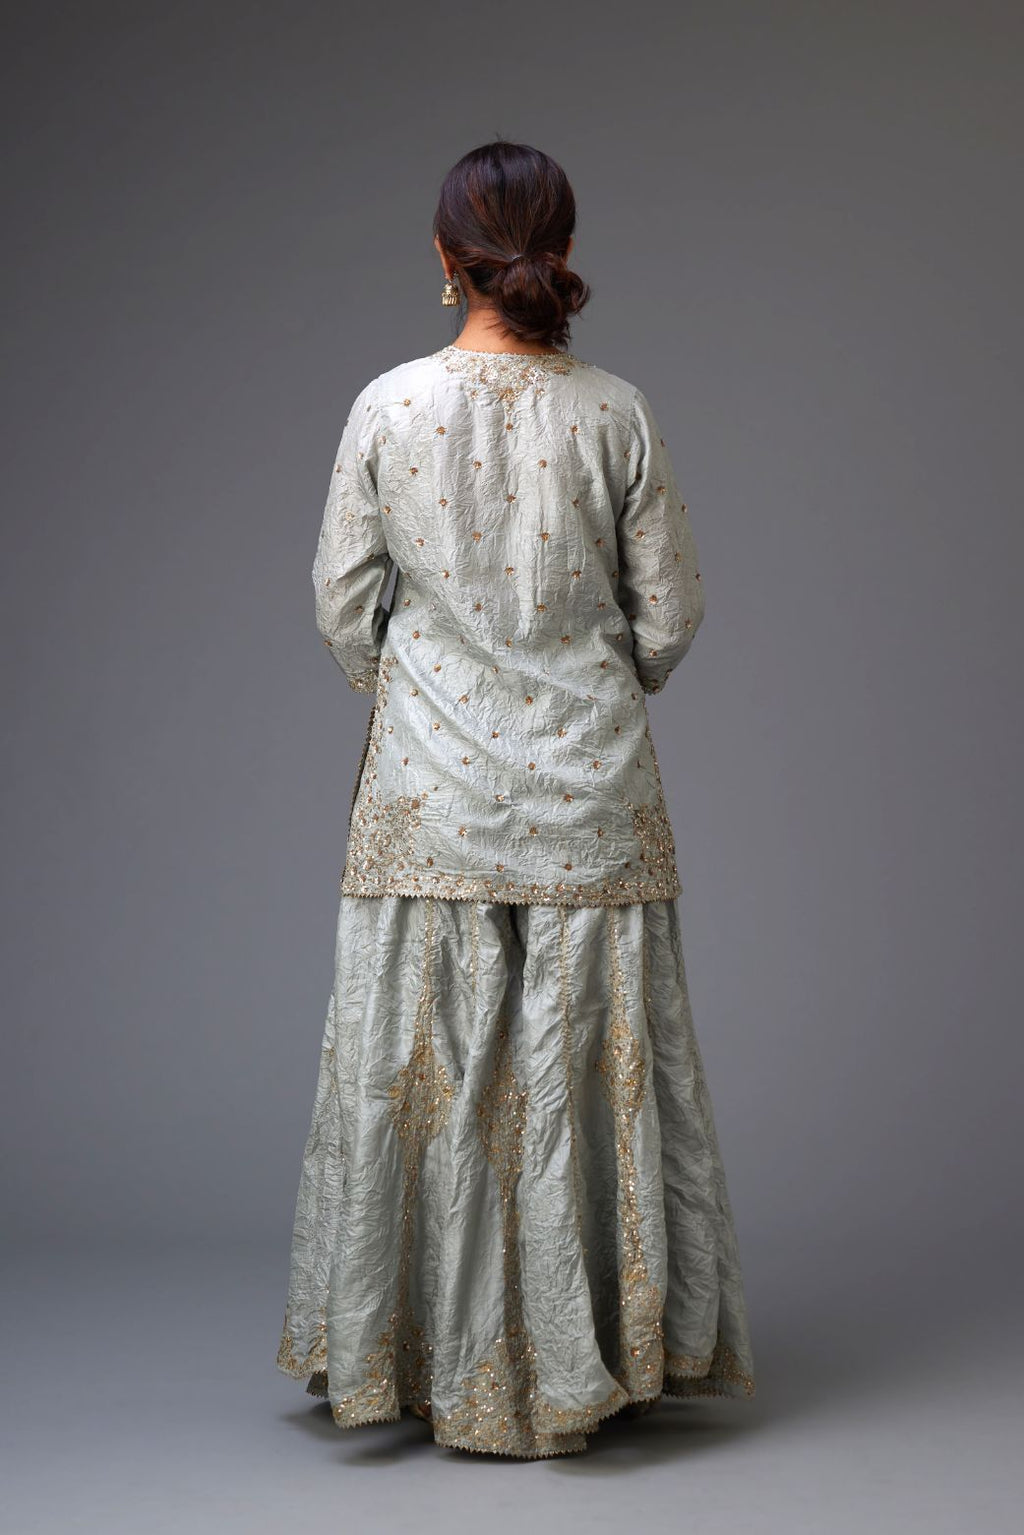 Blue hand crushed silk short kurta set with all-over gold sequins and zari handwork, highlighted with gota lace at edges.